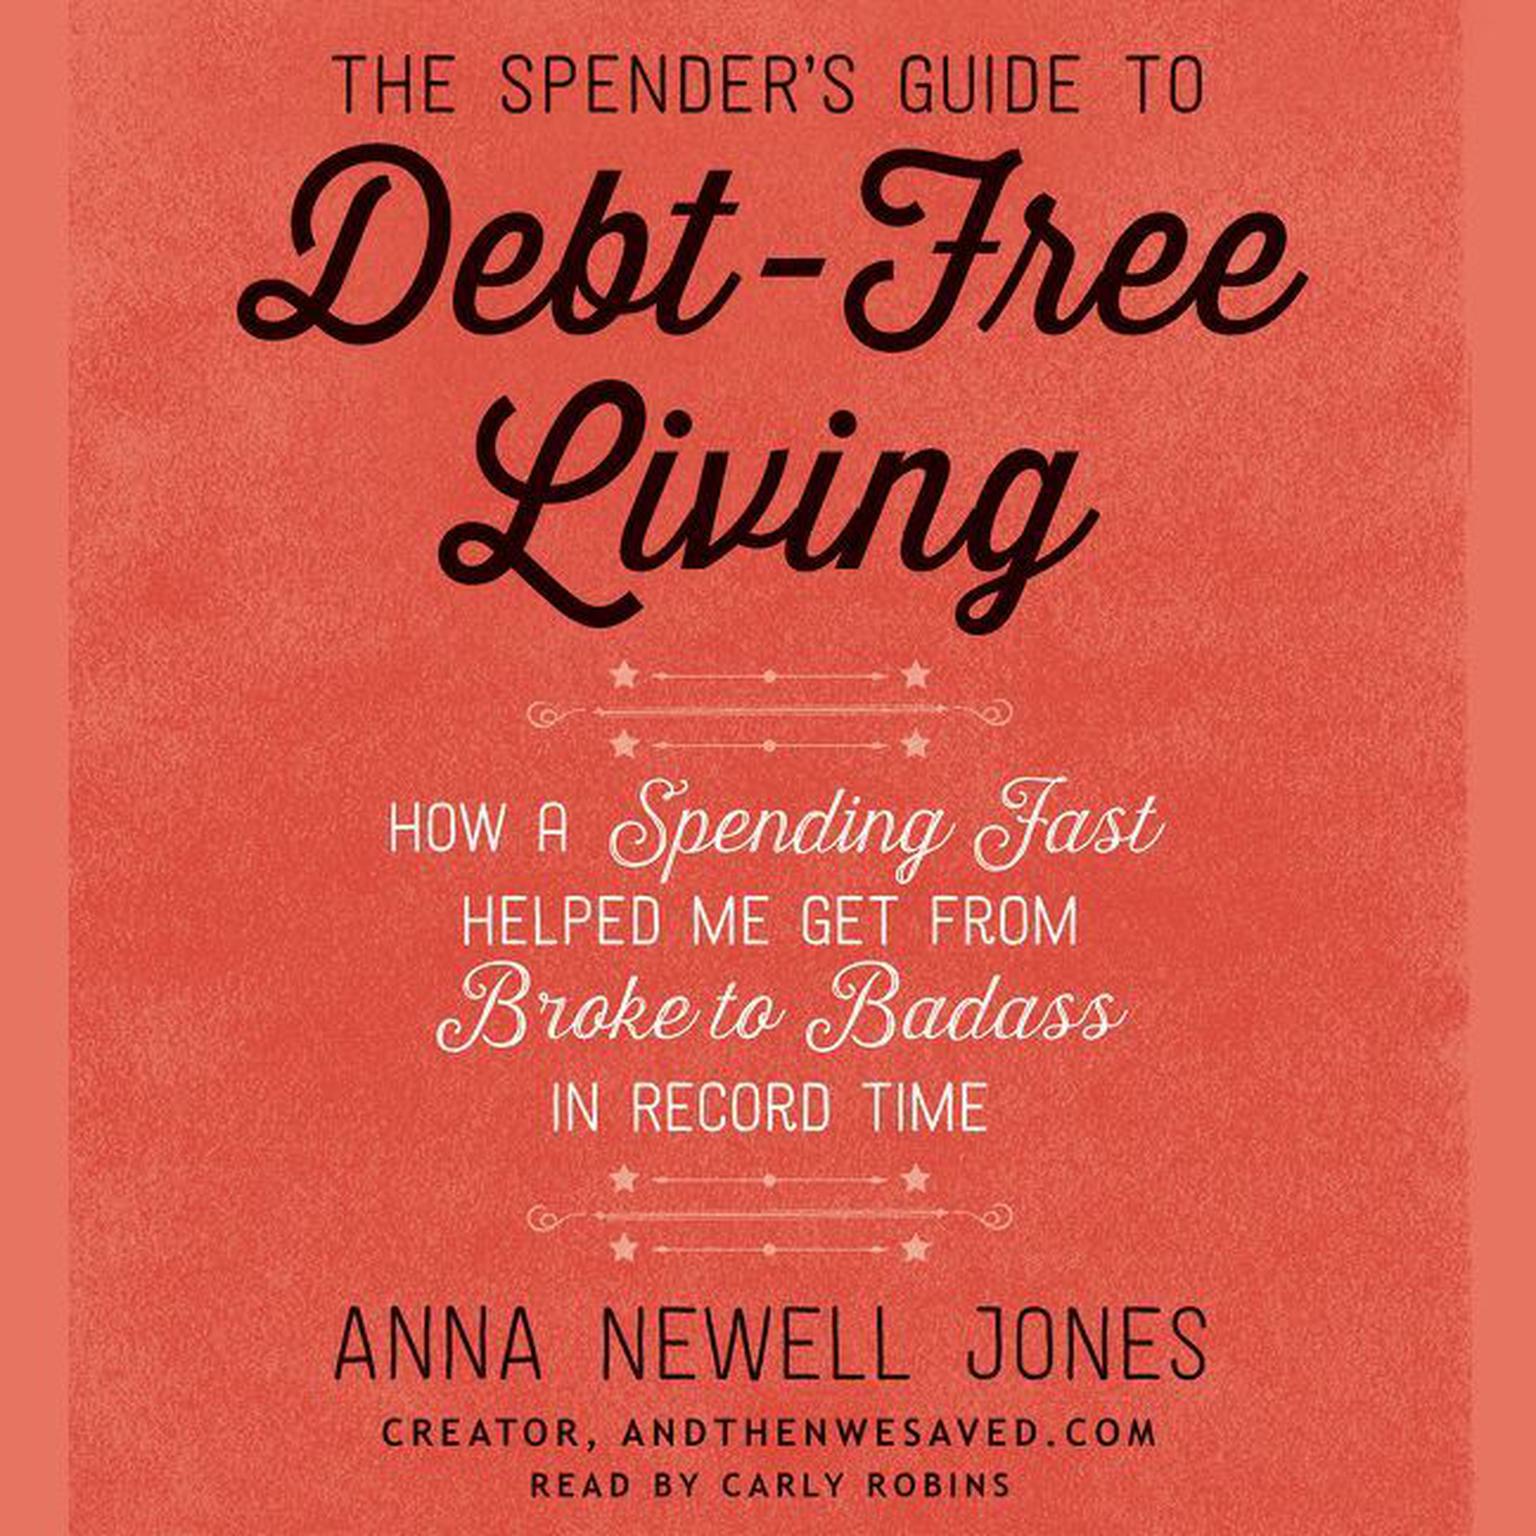 The Spenders Guide to Debt-Free Living: How a Spending Fast Helped Me Get from Broke to Badass in Record Time Audiobook, by Anna Newell Jones